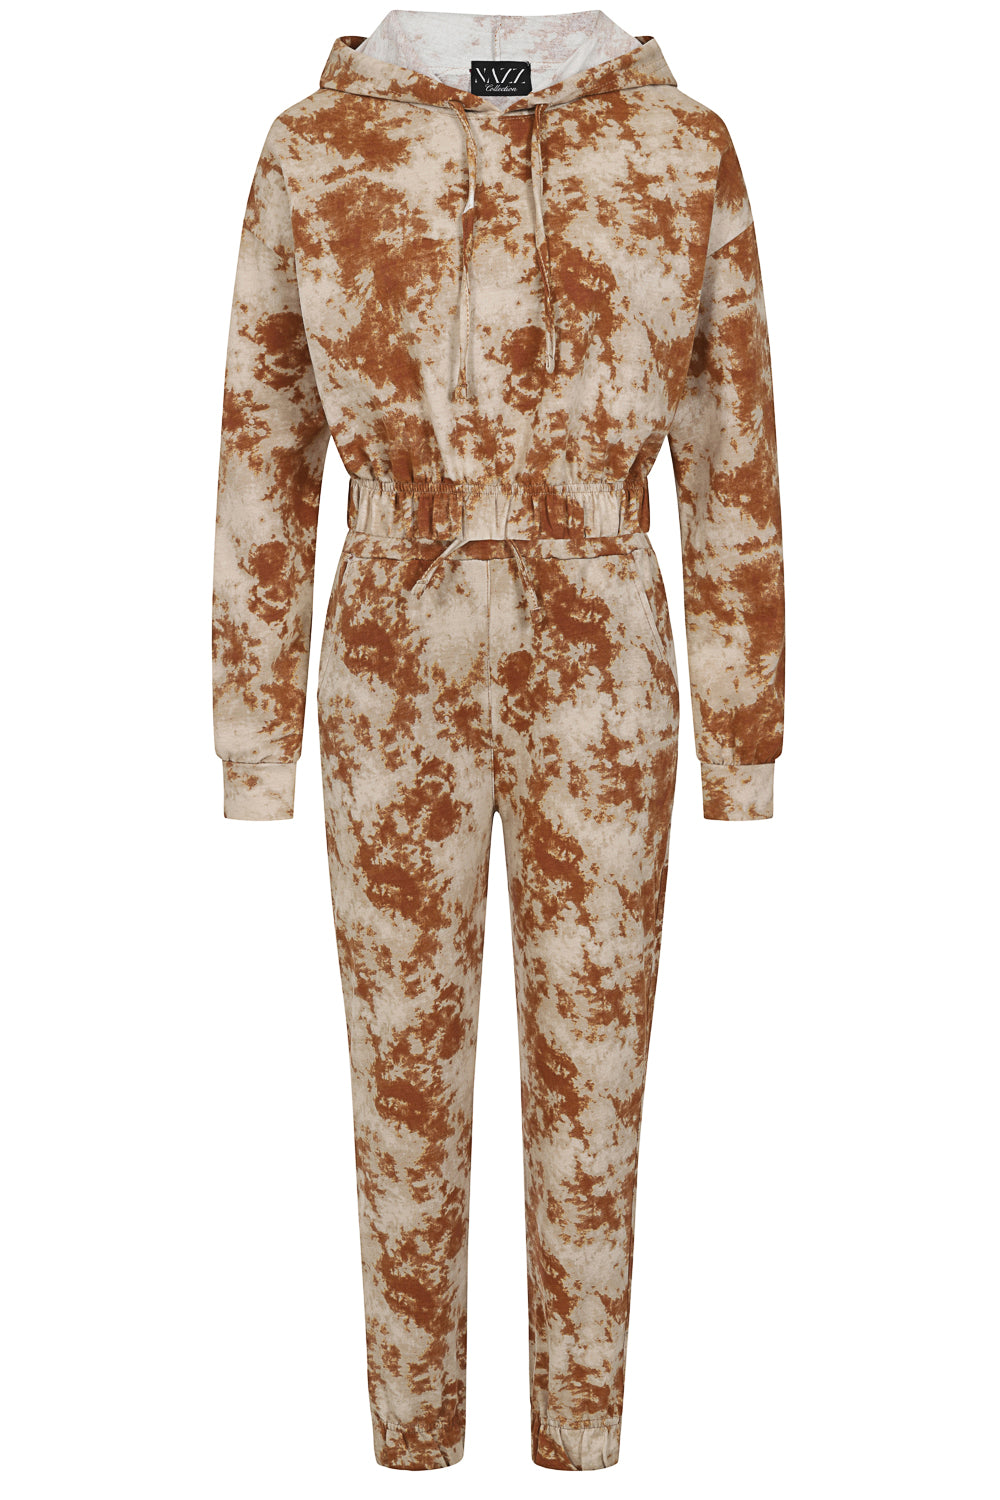 Haven Camel and Beige Two Tone Tie Dye 2 Piece Tracksuit Set